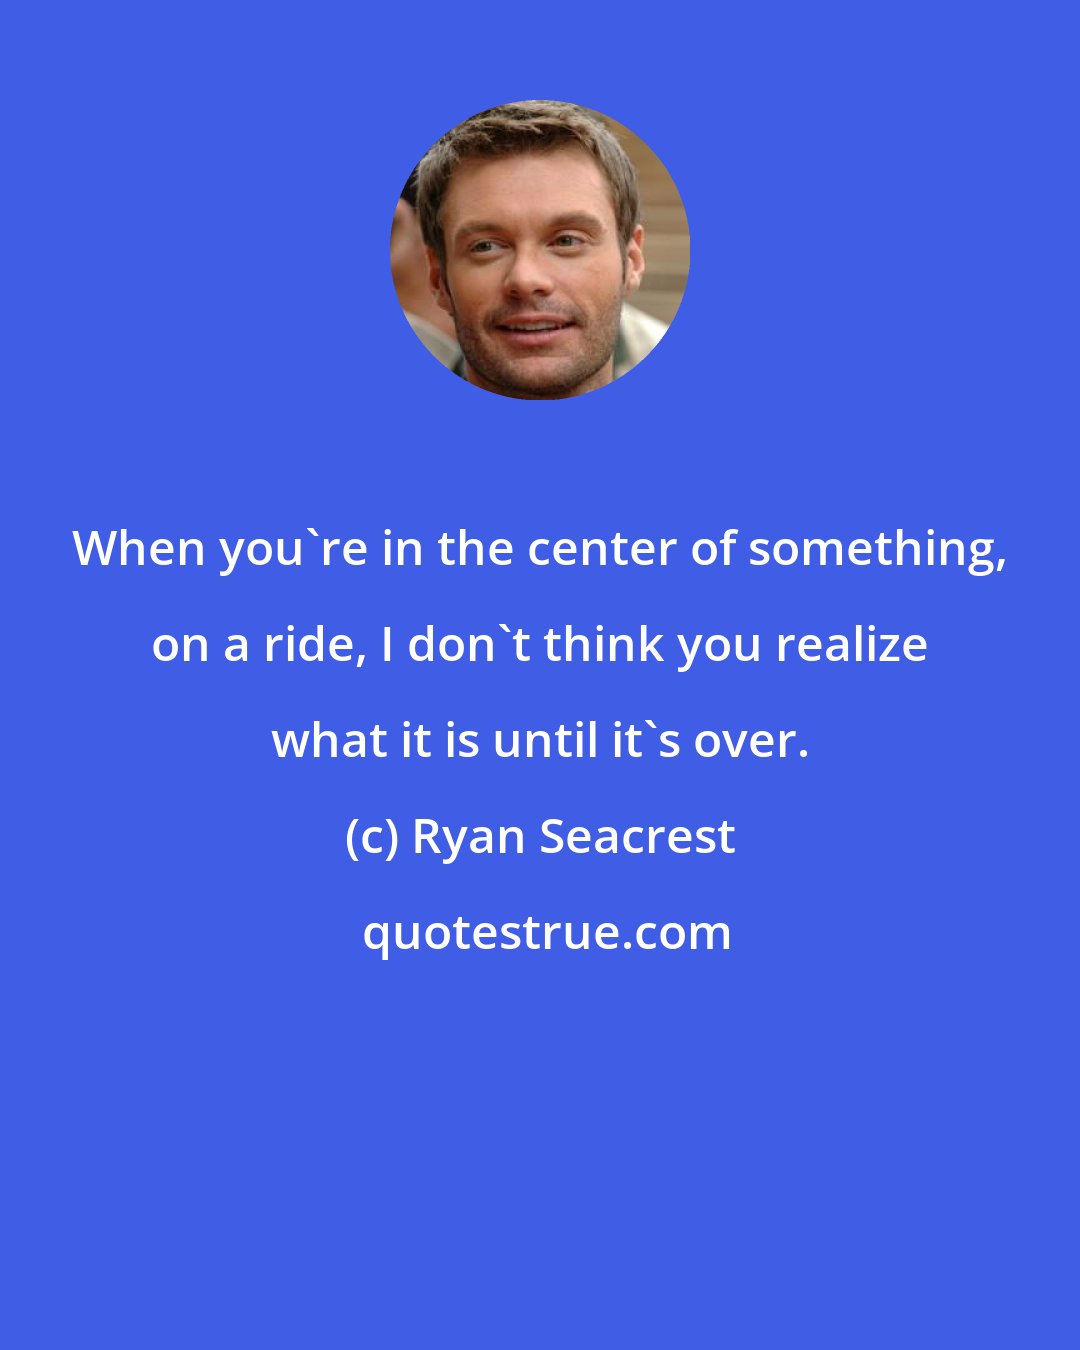 Ryan Seacrest: When you're in the center of something, on a ride, I don't think you realize what it is until it's over.